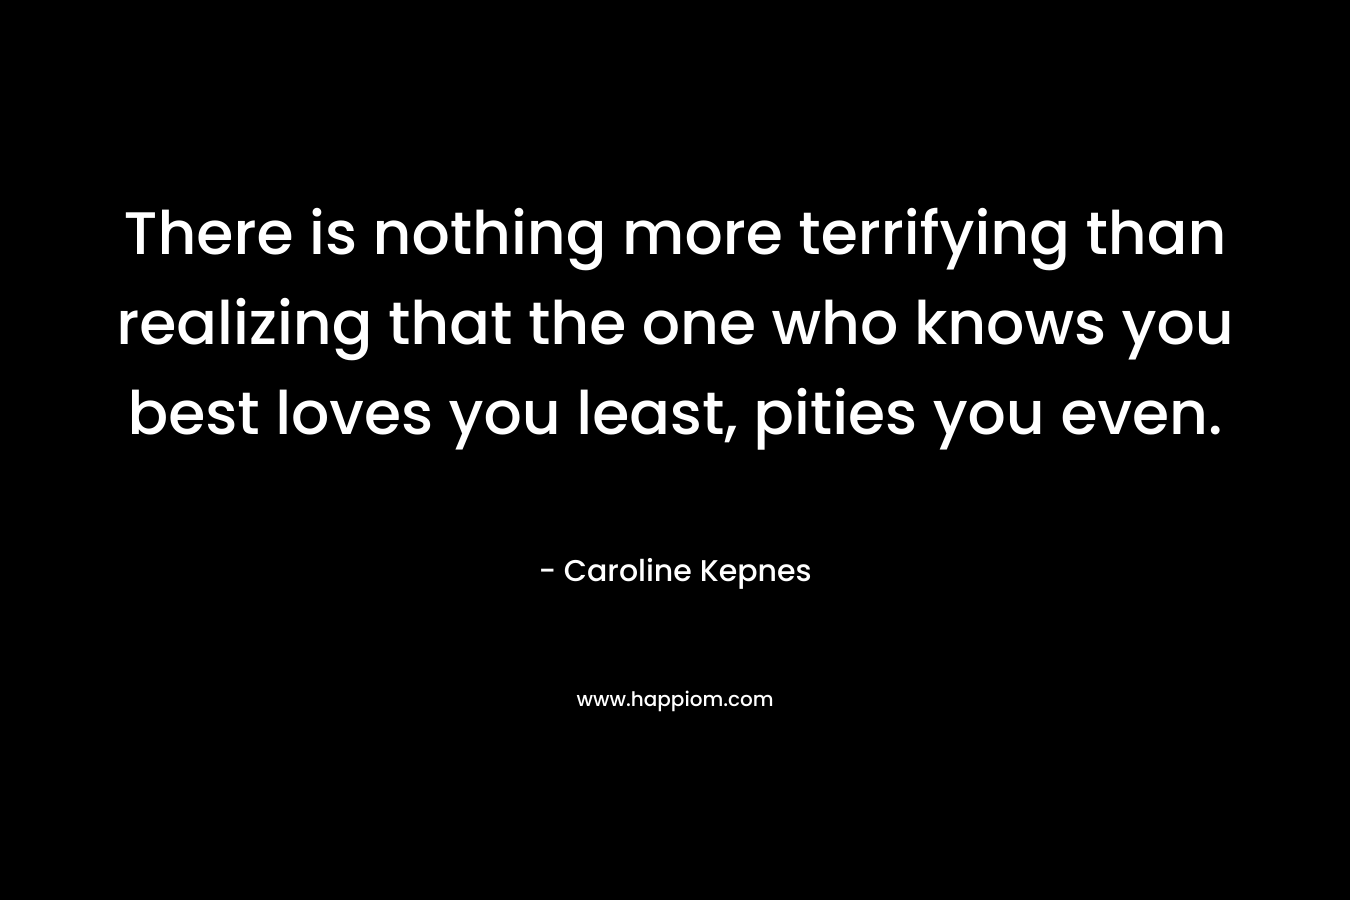 There is nothing more terrifying than realizing that the one who knows you best loves you least, pities you even.